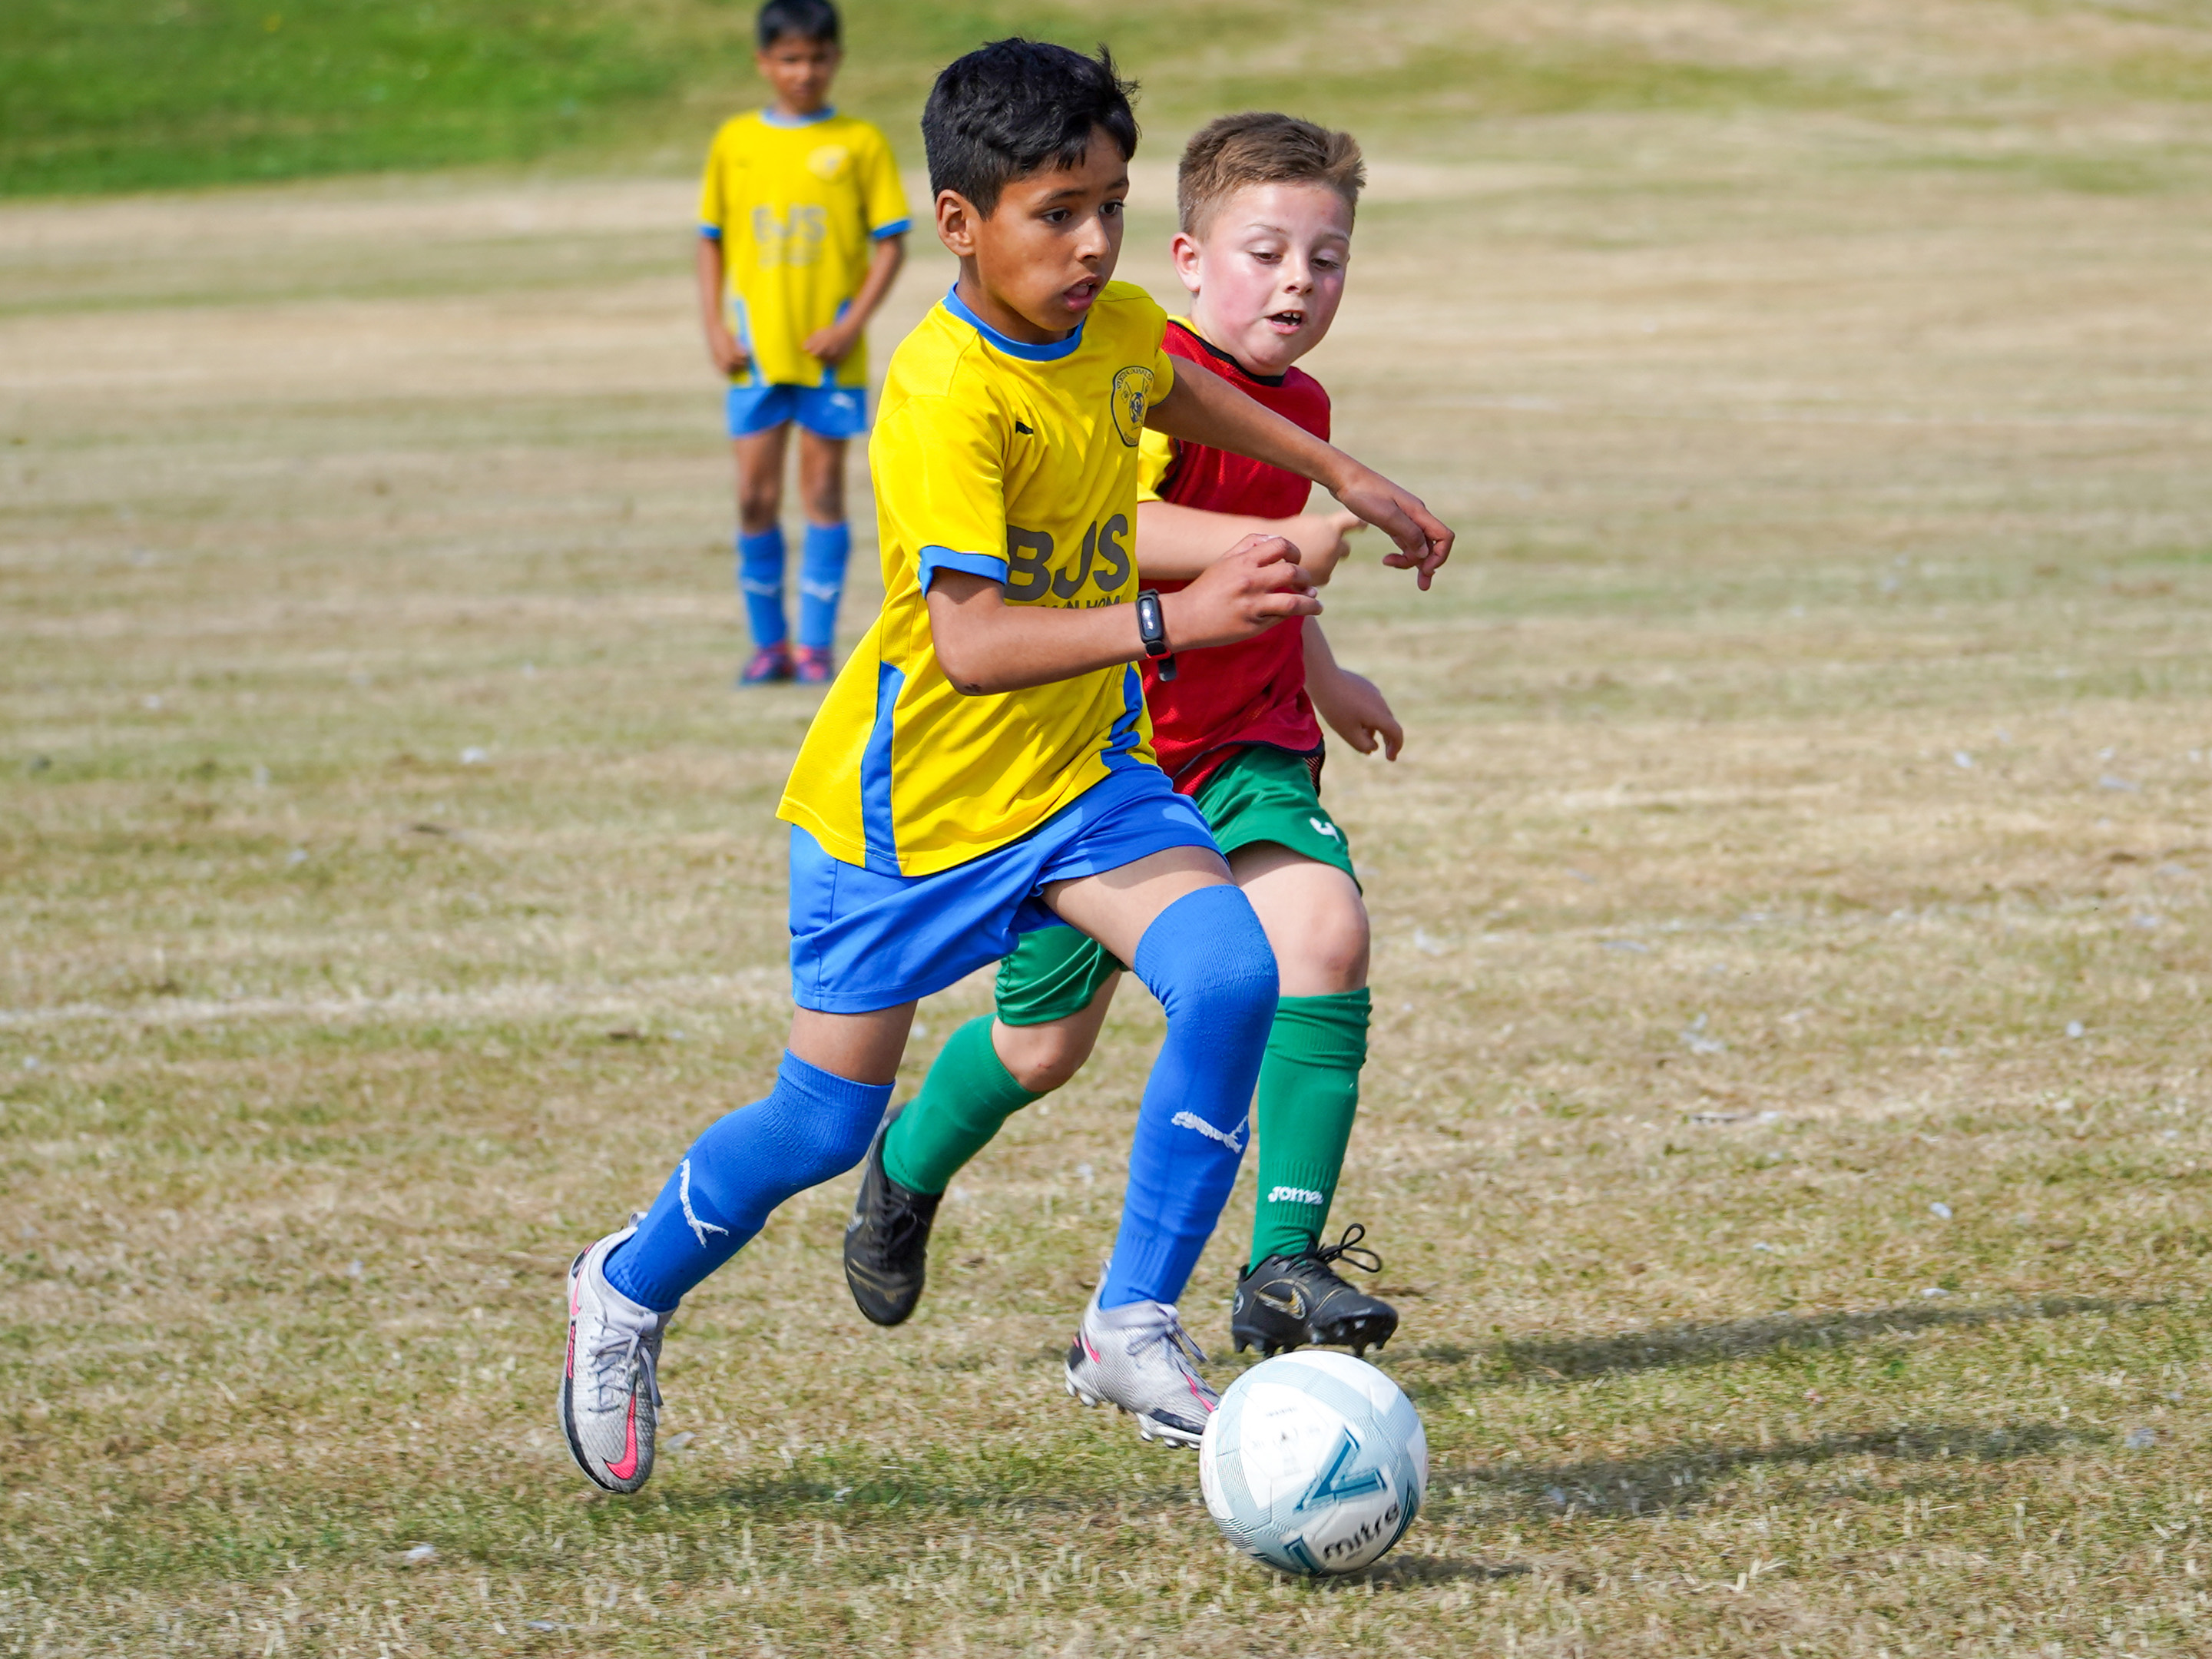 Grassroots players running with football at his feet.